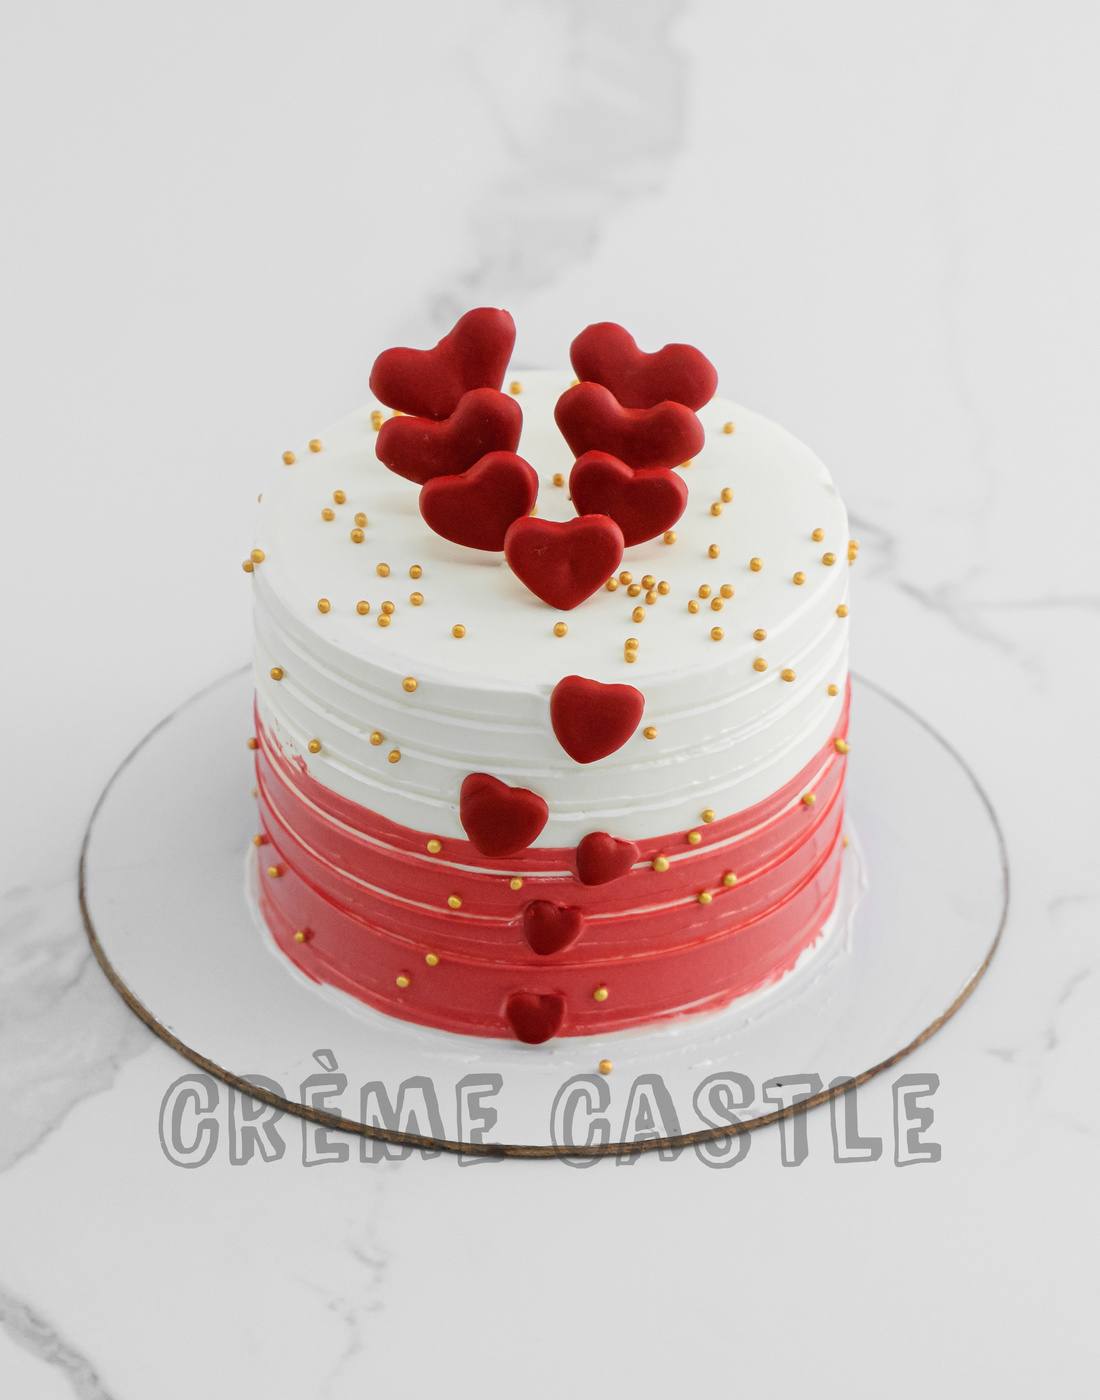 11 Romantic Valentine Cake Ideas To Wow Your Special Someone This Year -  Wondafox